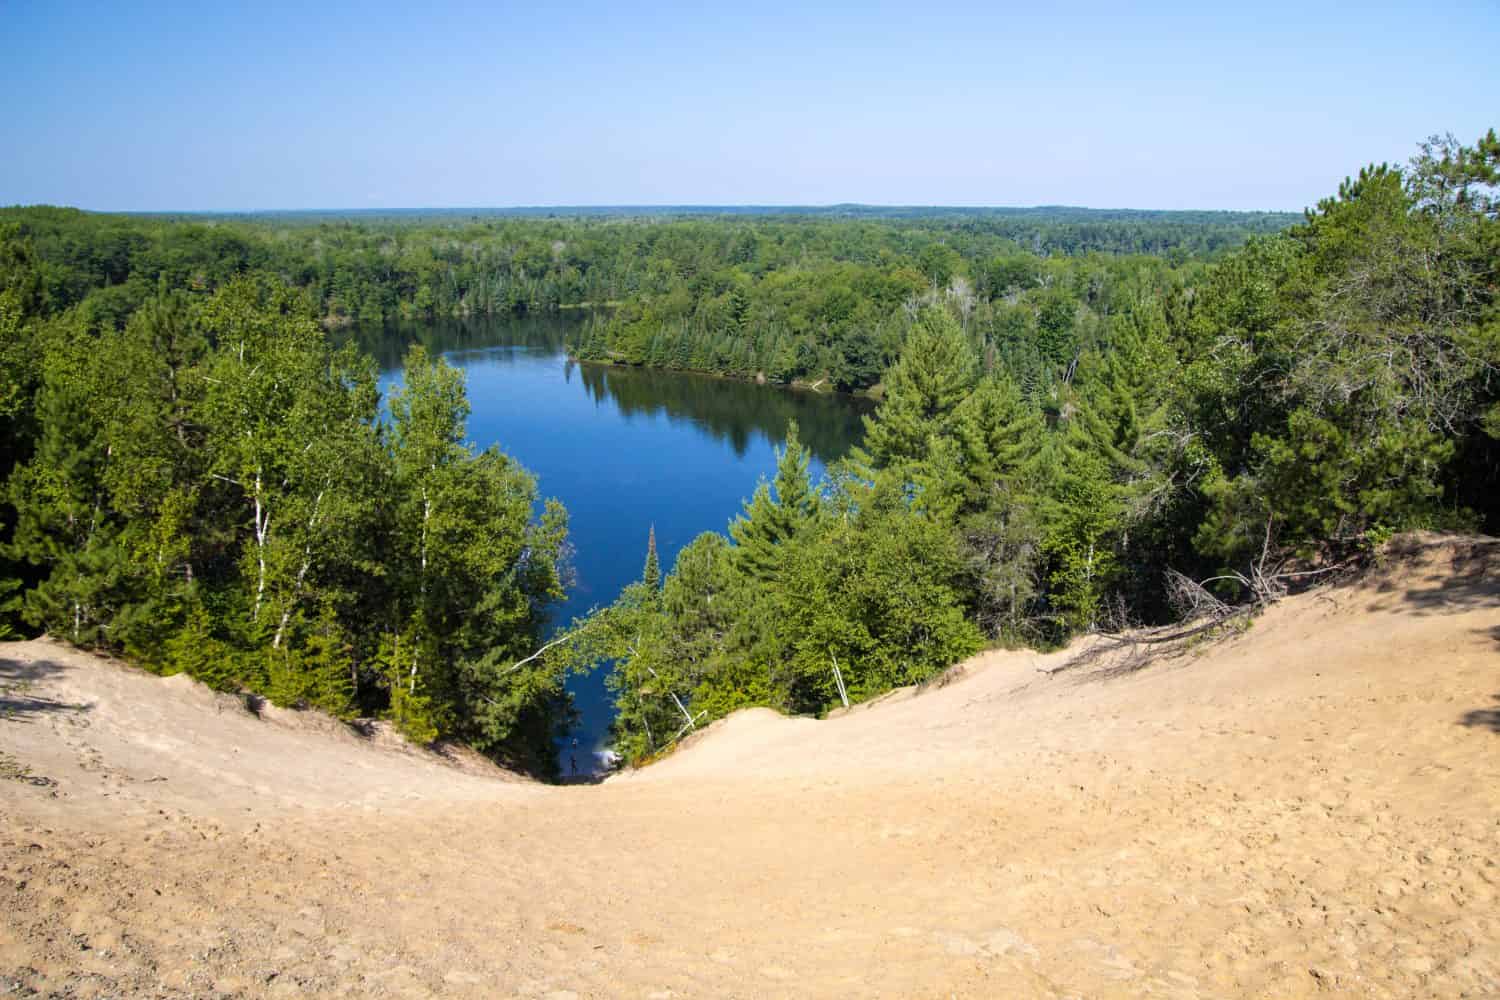 Au Sable River Wilderness Overlook. View of the Huron National Forest wilderness with the famous Au Sable River in the lush green forests of Michigan.